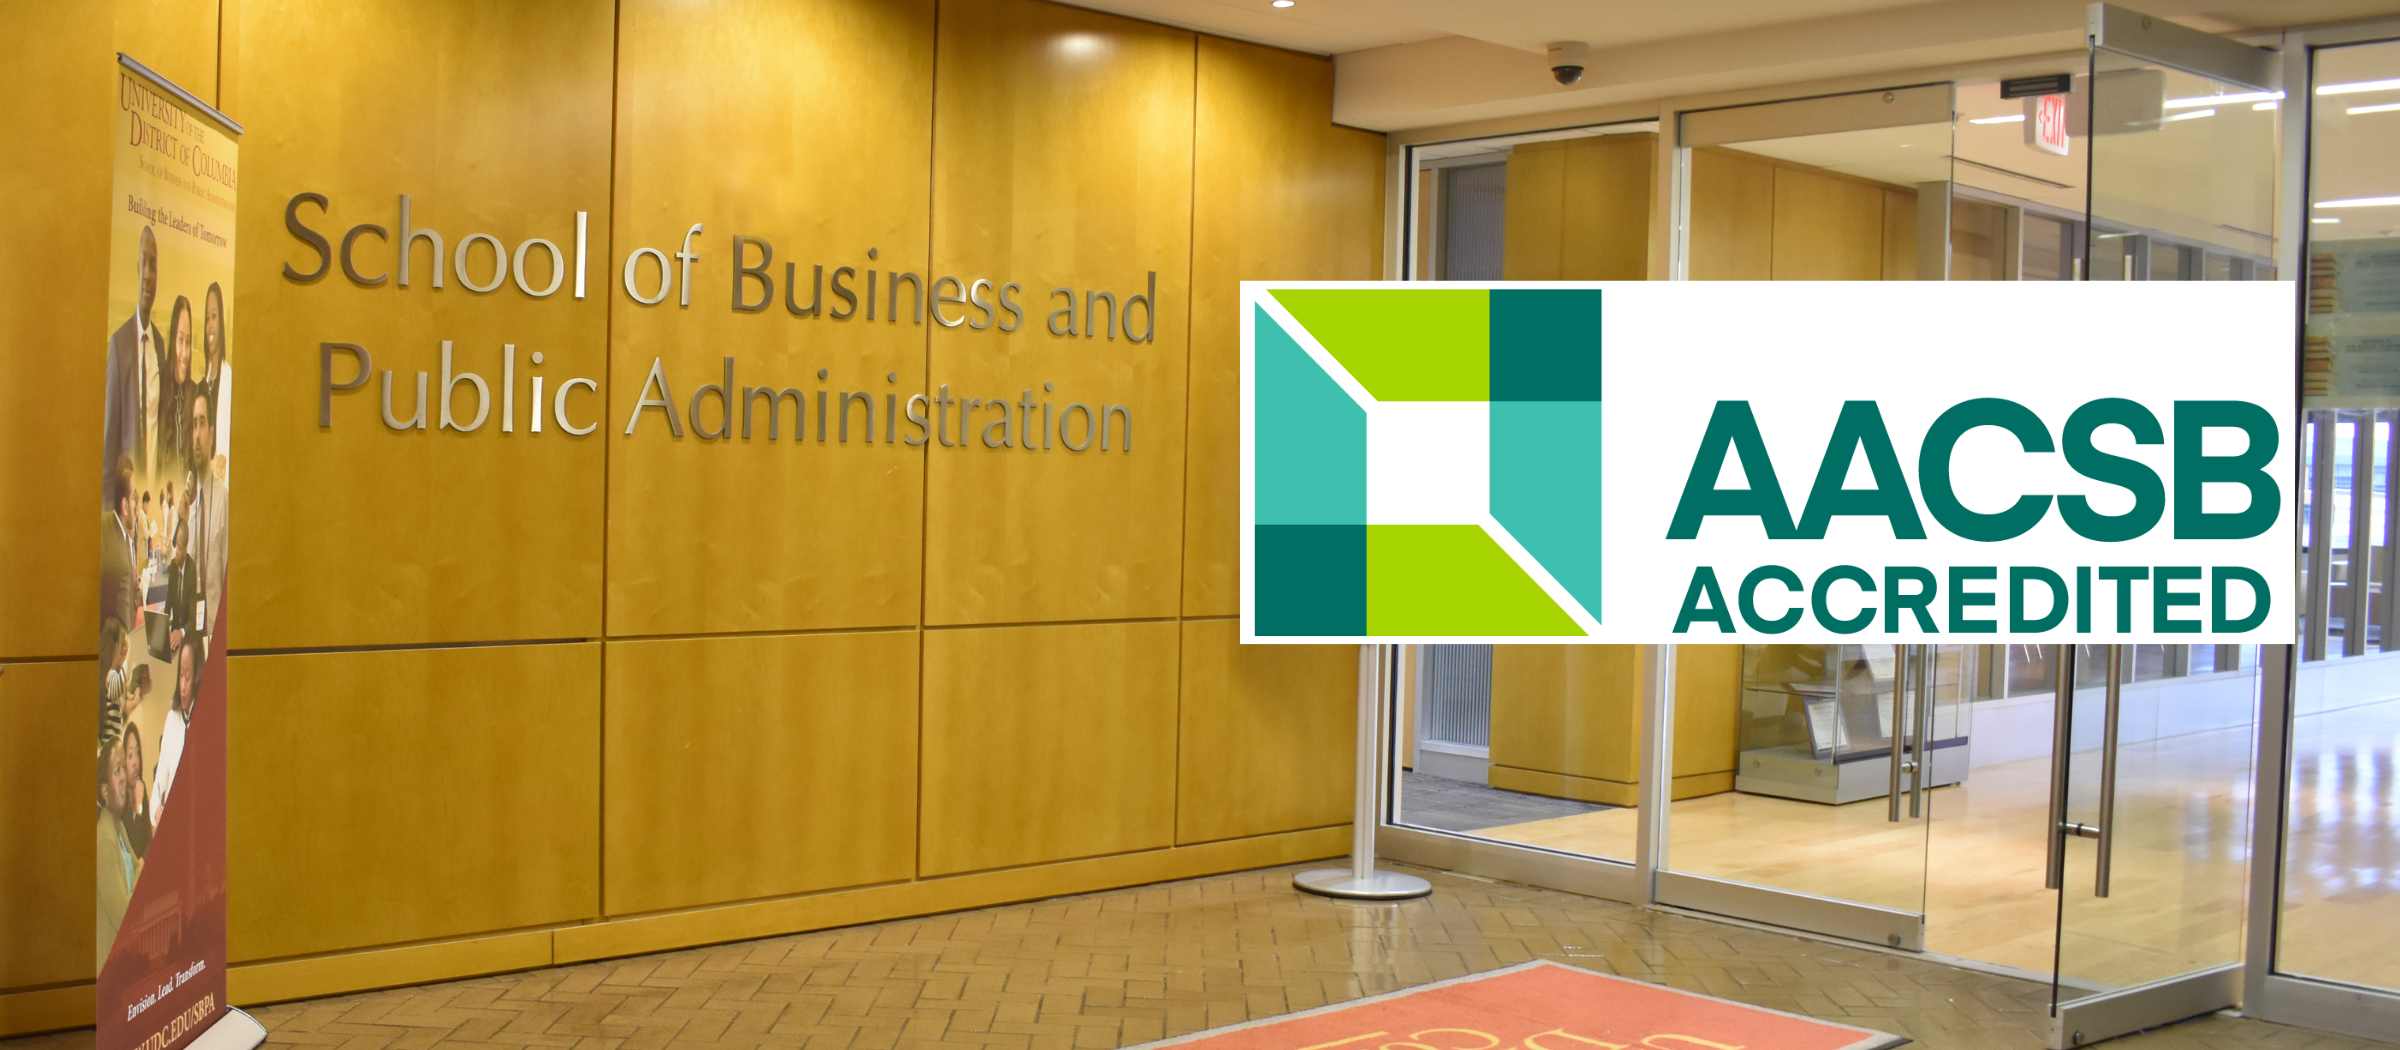 SBPA recognized for prestigious AACSB accreditation, inducted into honor society